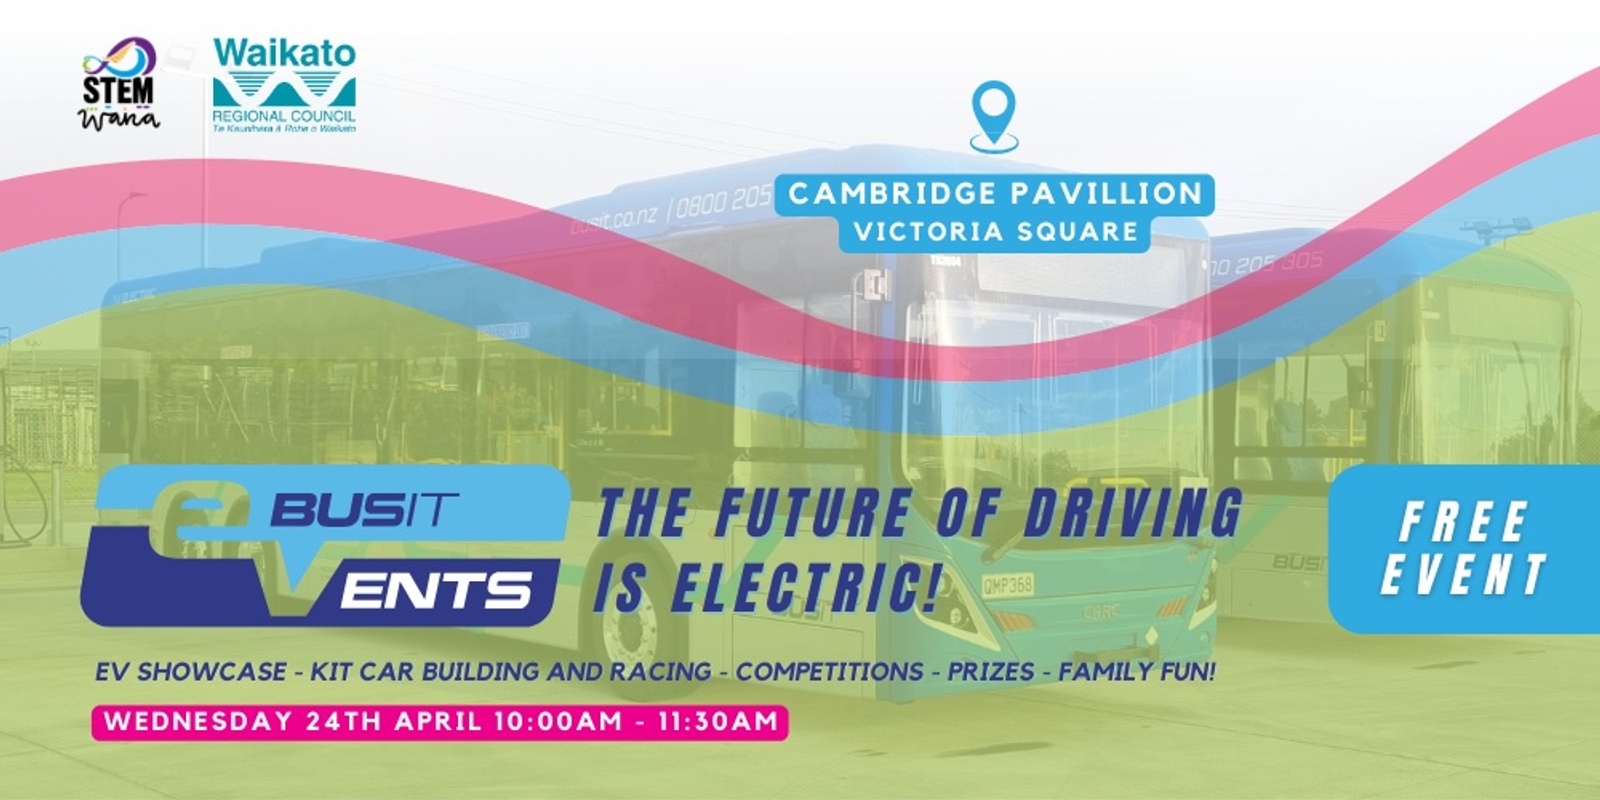 Banner image for BUSIT & STEM Wana Event - The future of driving is electric - Cambridge